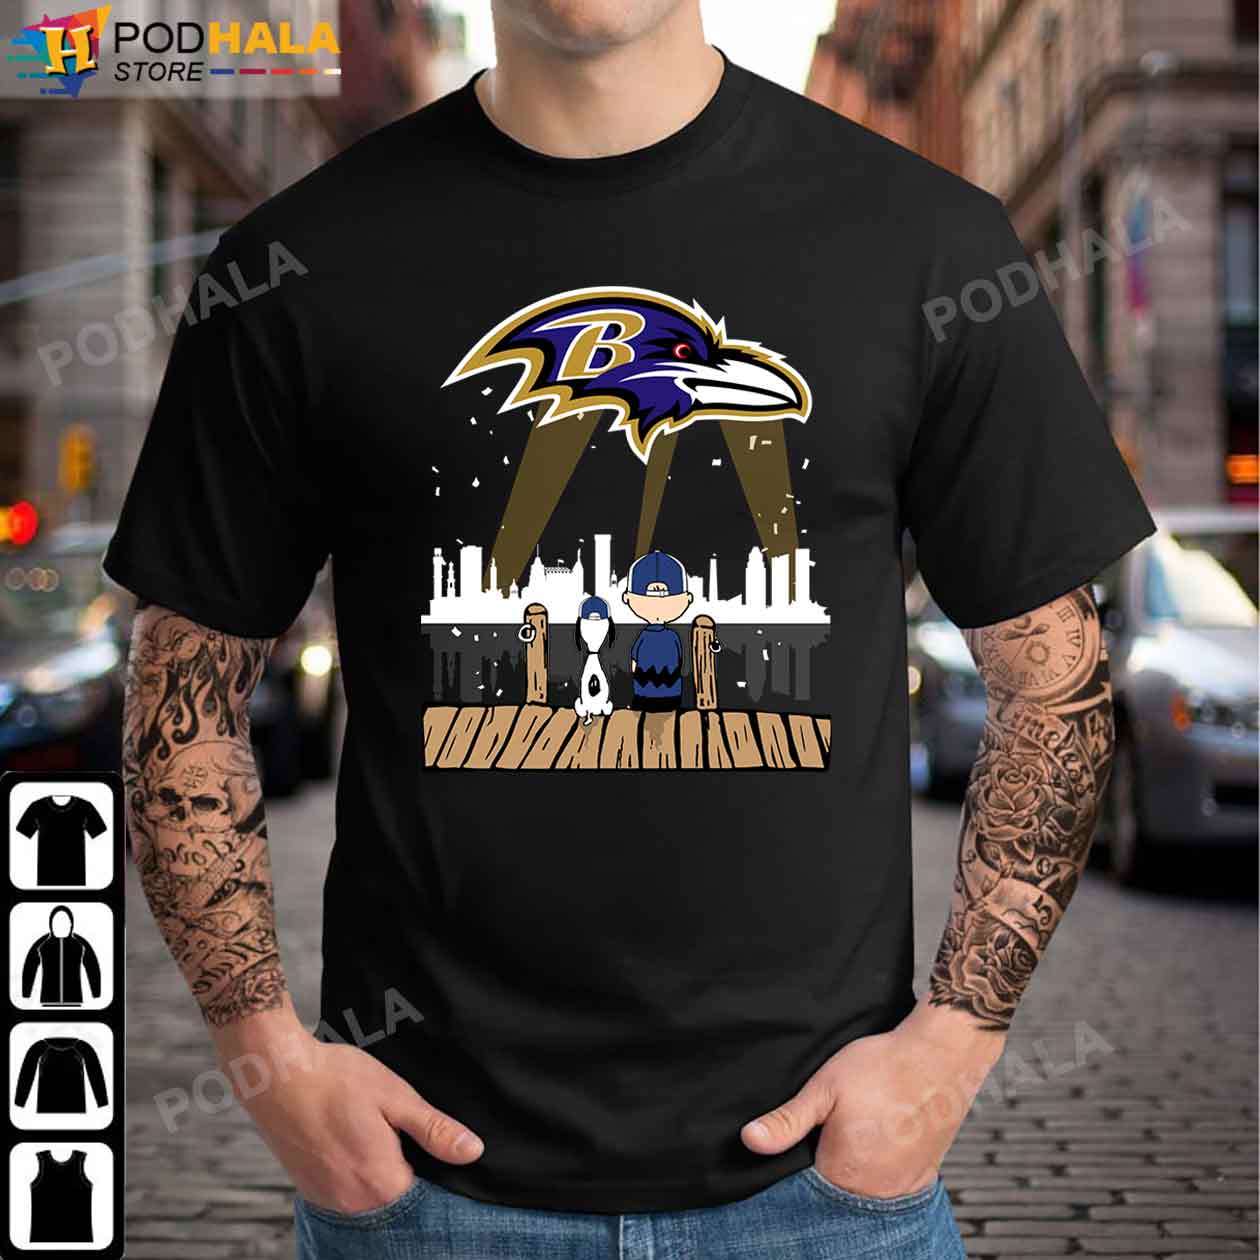 the baltimore ravens store